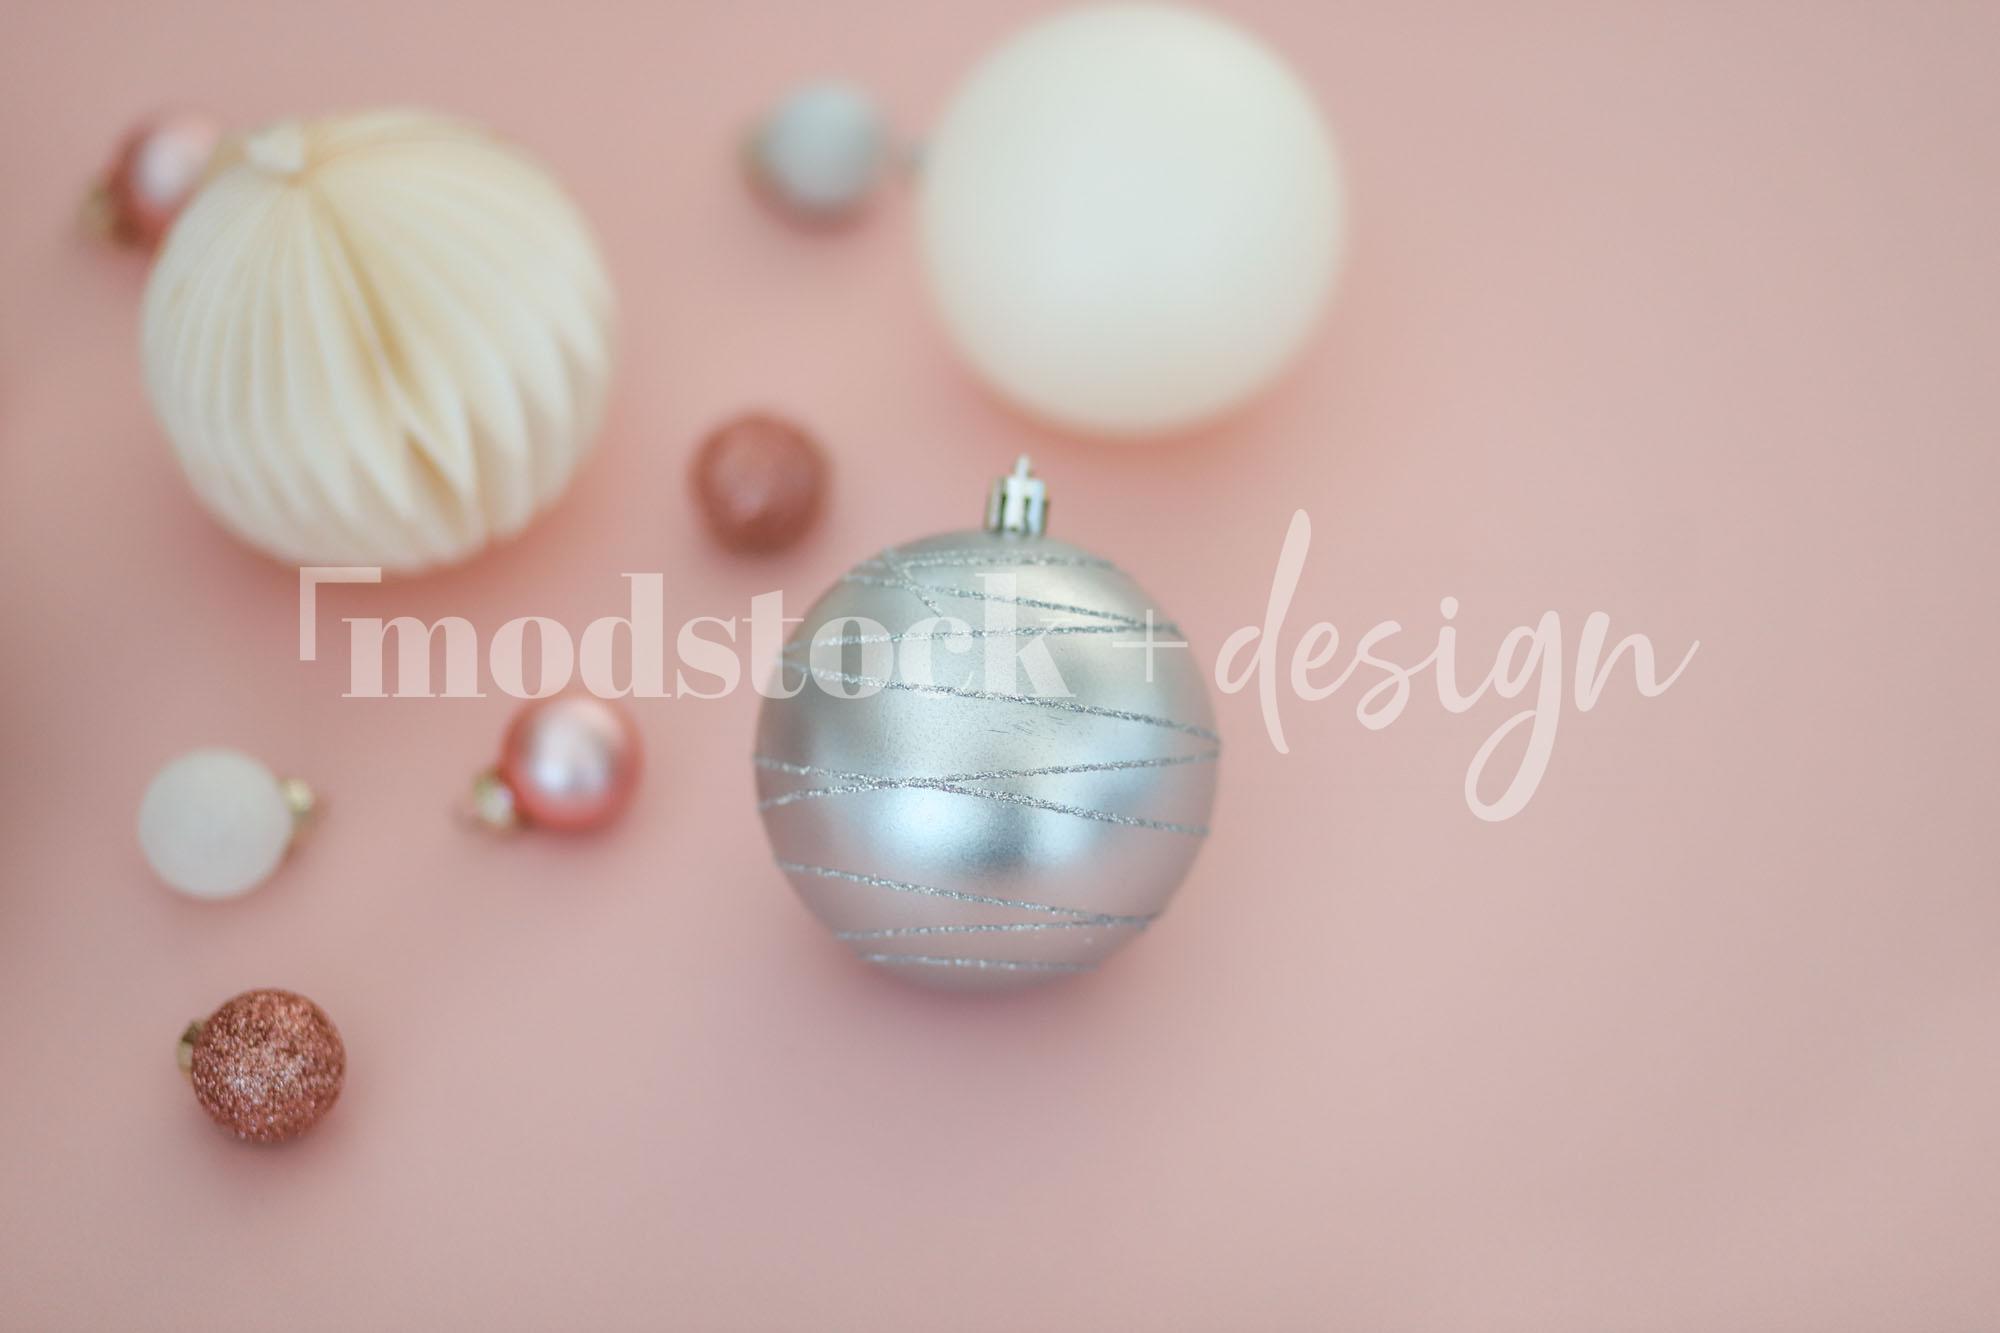 Ornaments and Baubles 52